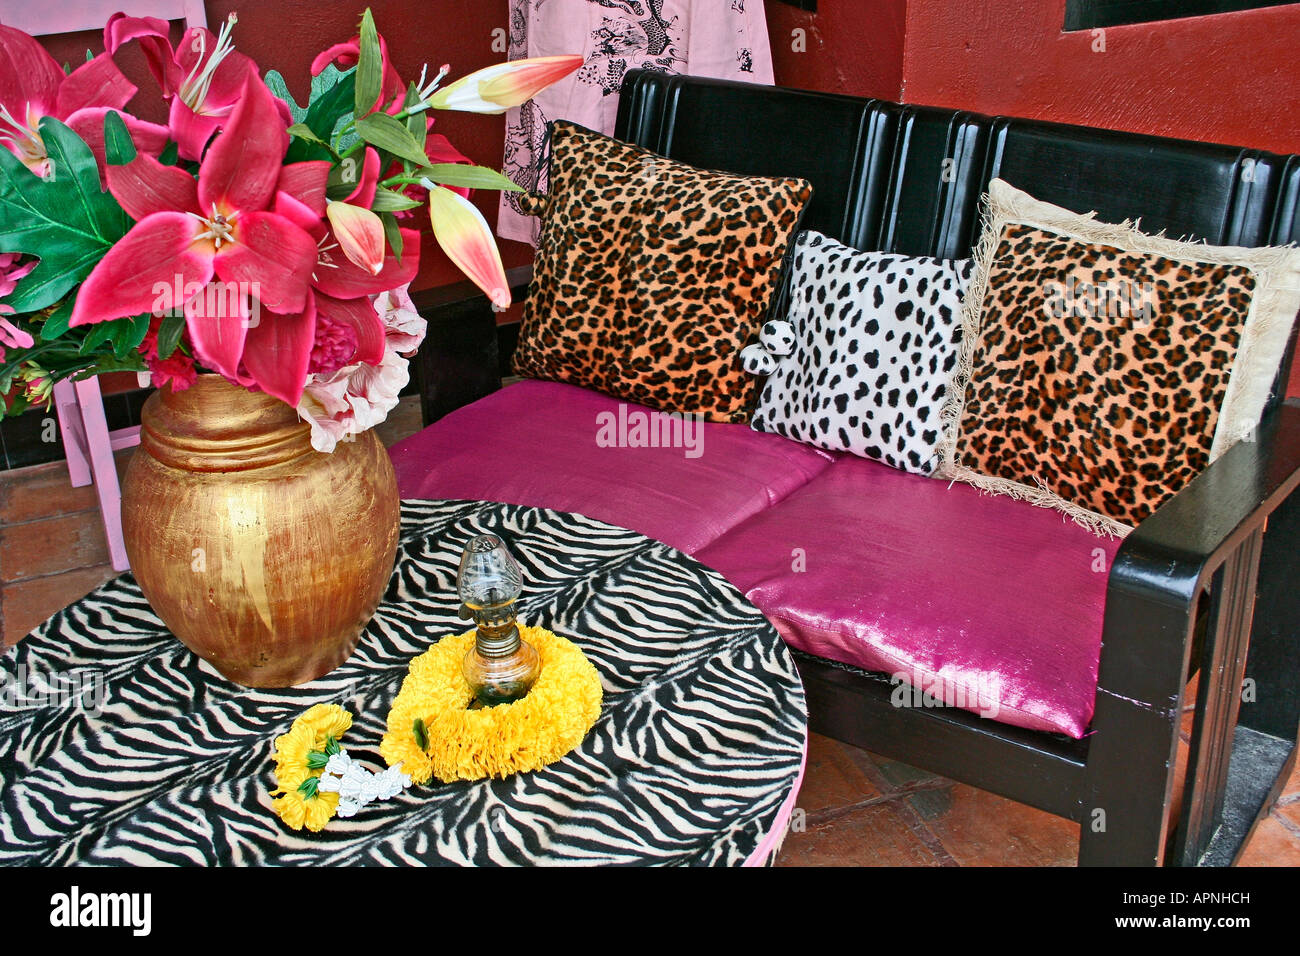 eclectic style soft furnishings Stock Photo